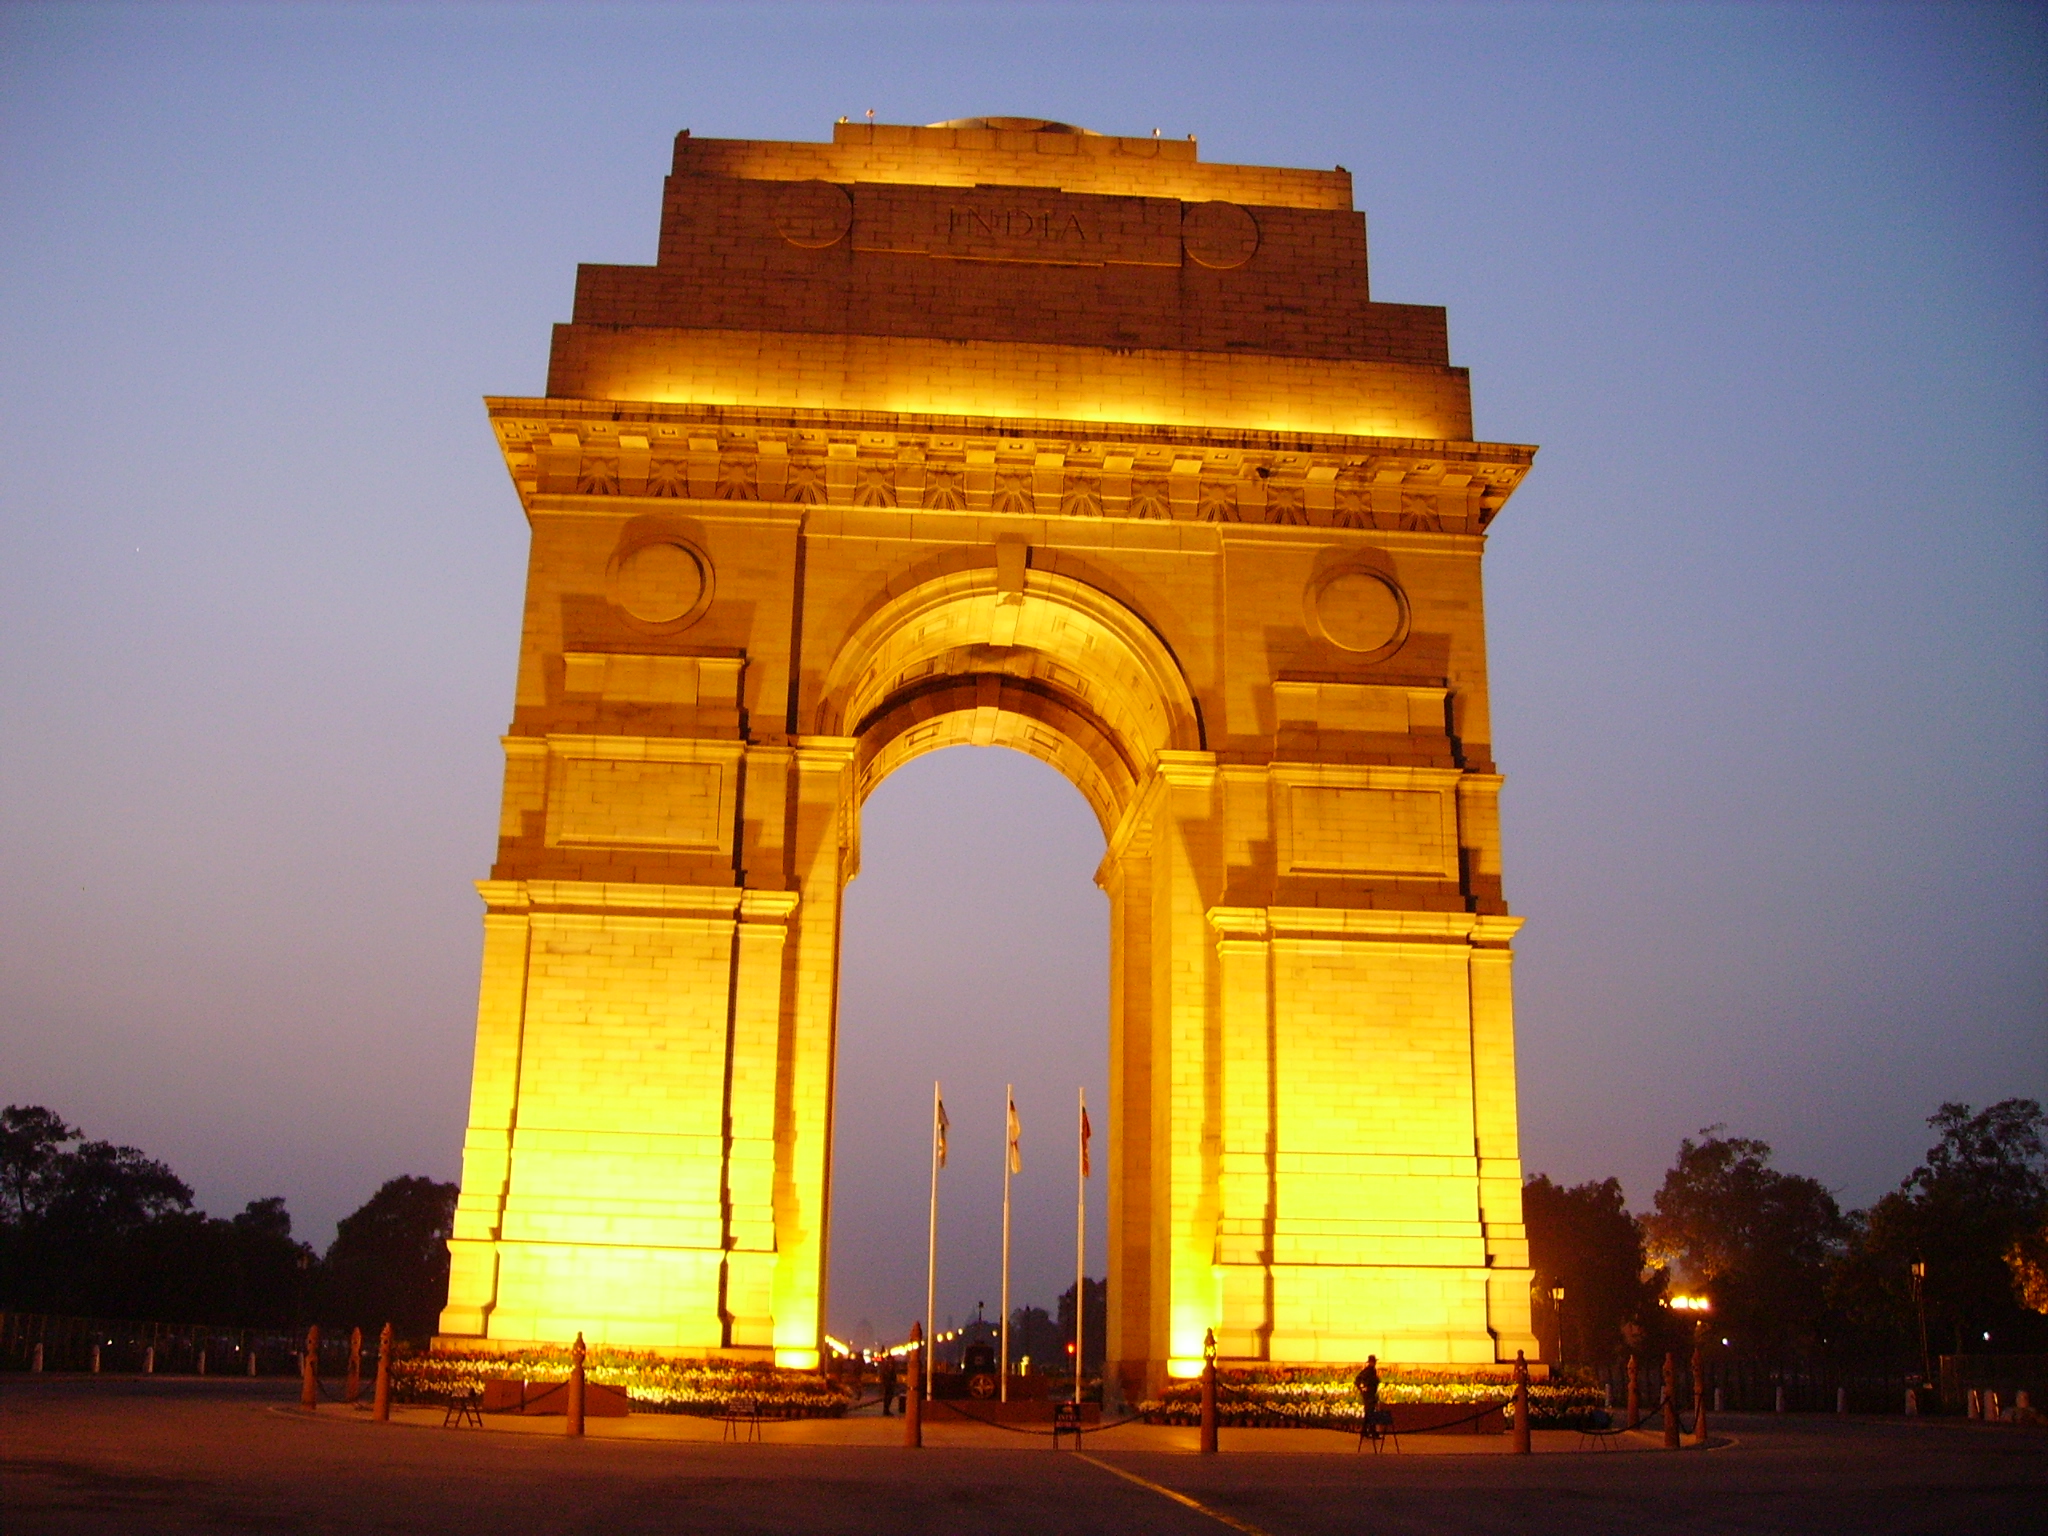 Top 5 Historical Places To Visit In Delhi